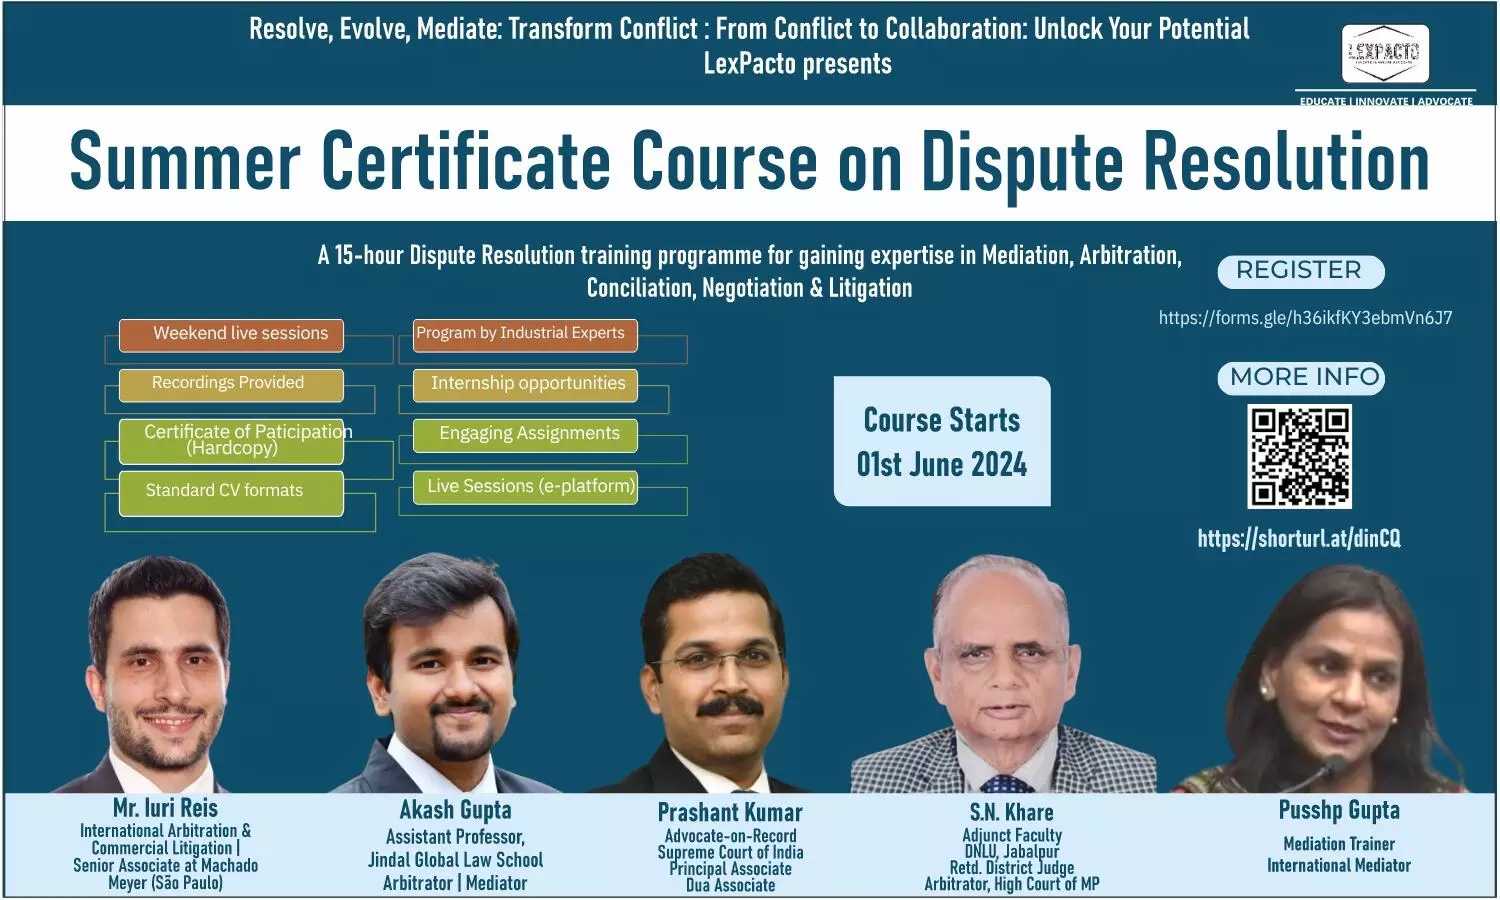 Certificate Course on Dispute Resolution | LexPacto